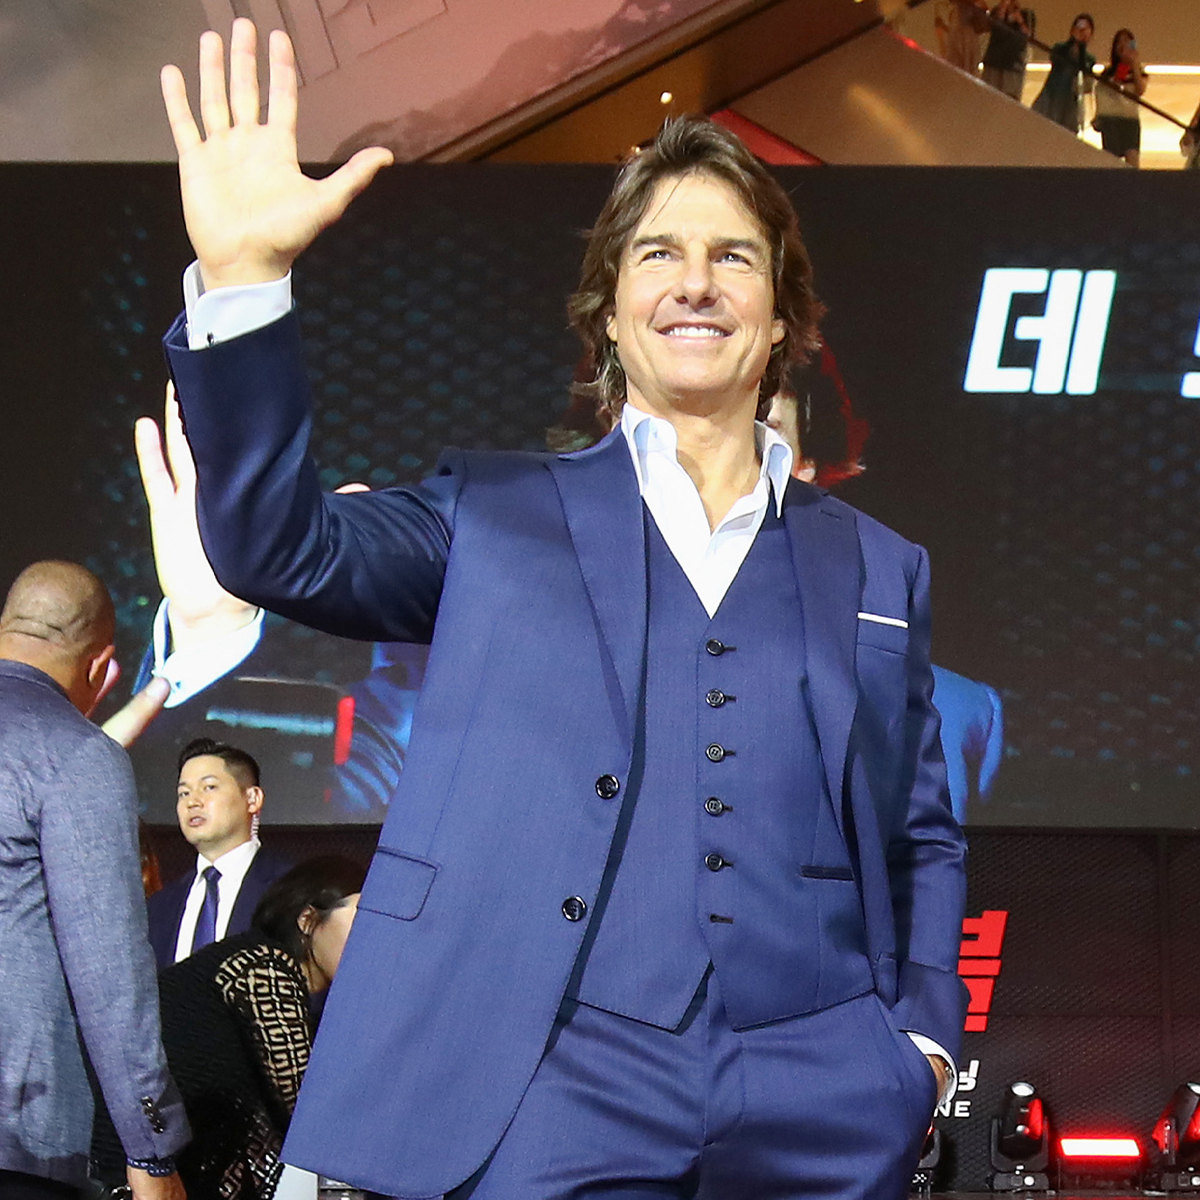 Your Mission: Enjoy These 61 Facts About Tom Cruise